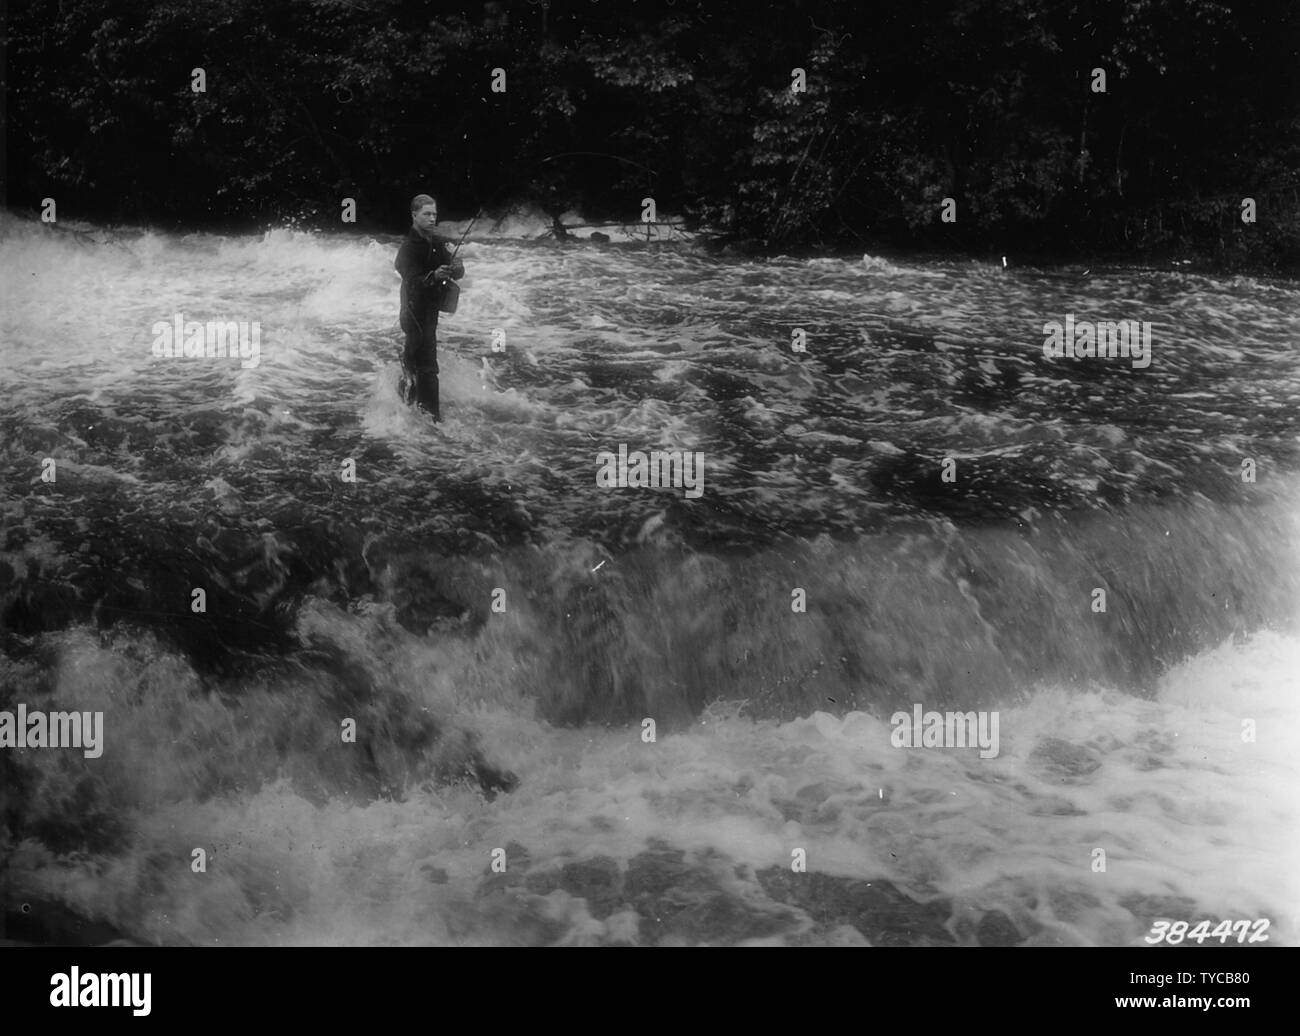 Photograph of George Encahl of Flint; Scope and content:  Original caption: George Encahl of Flint, Michigan fishing in rapids below Autrain Falls. Stock Photo